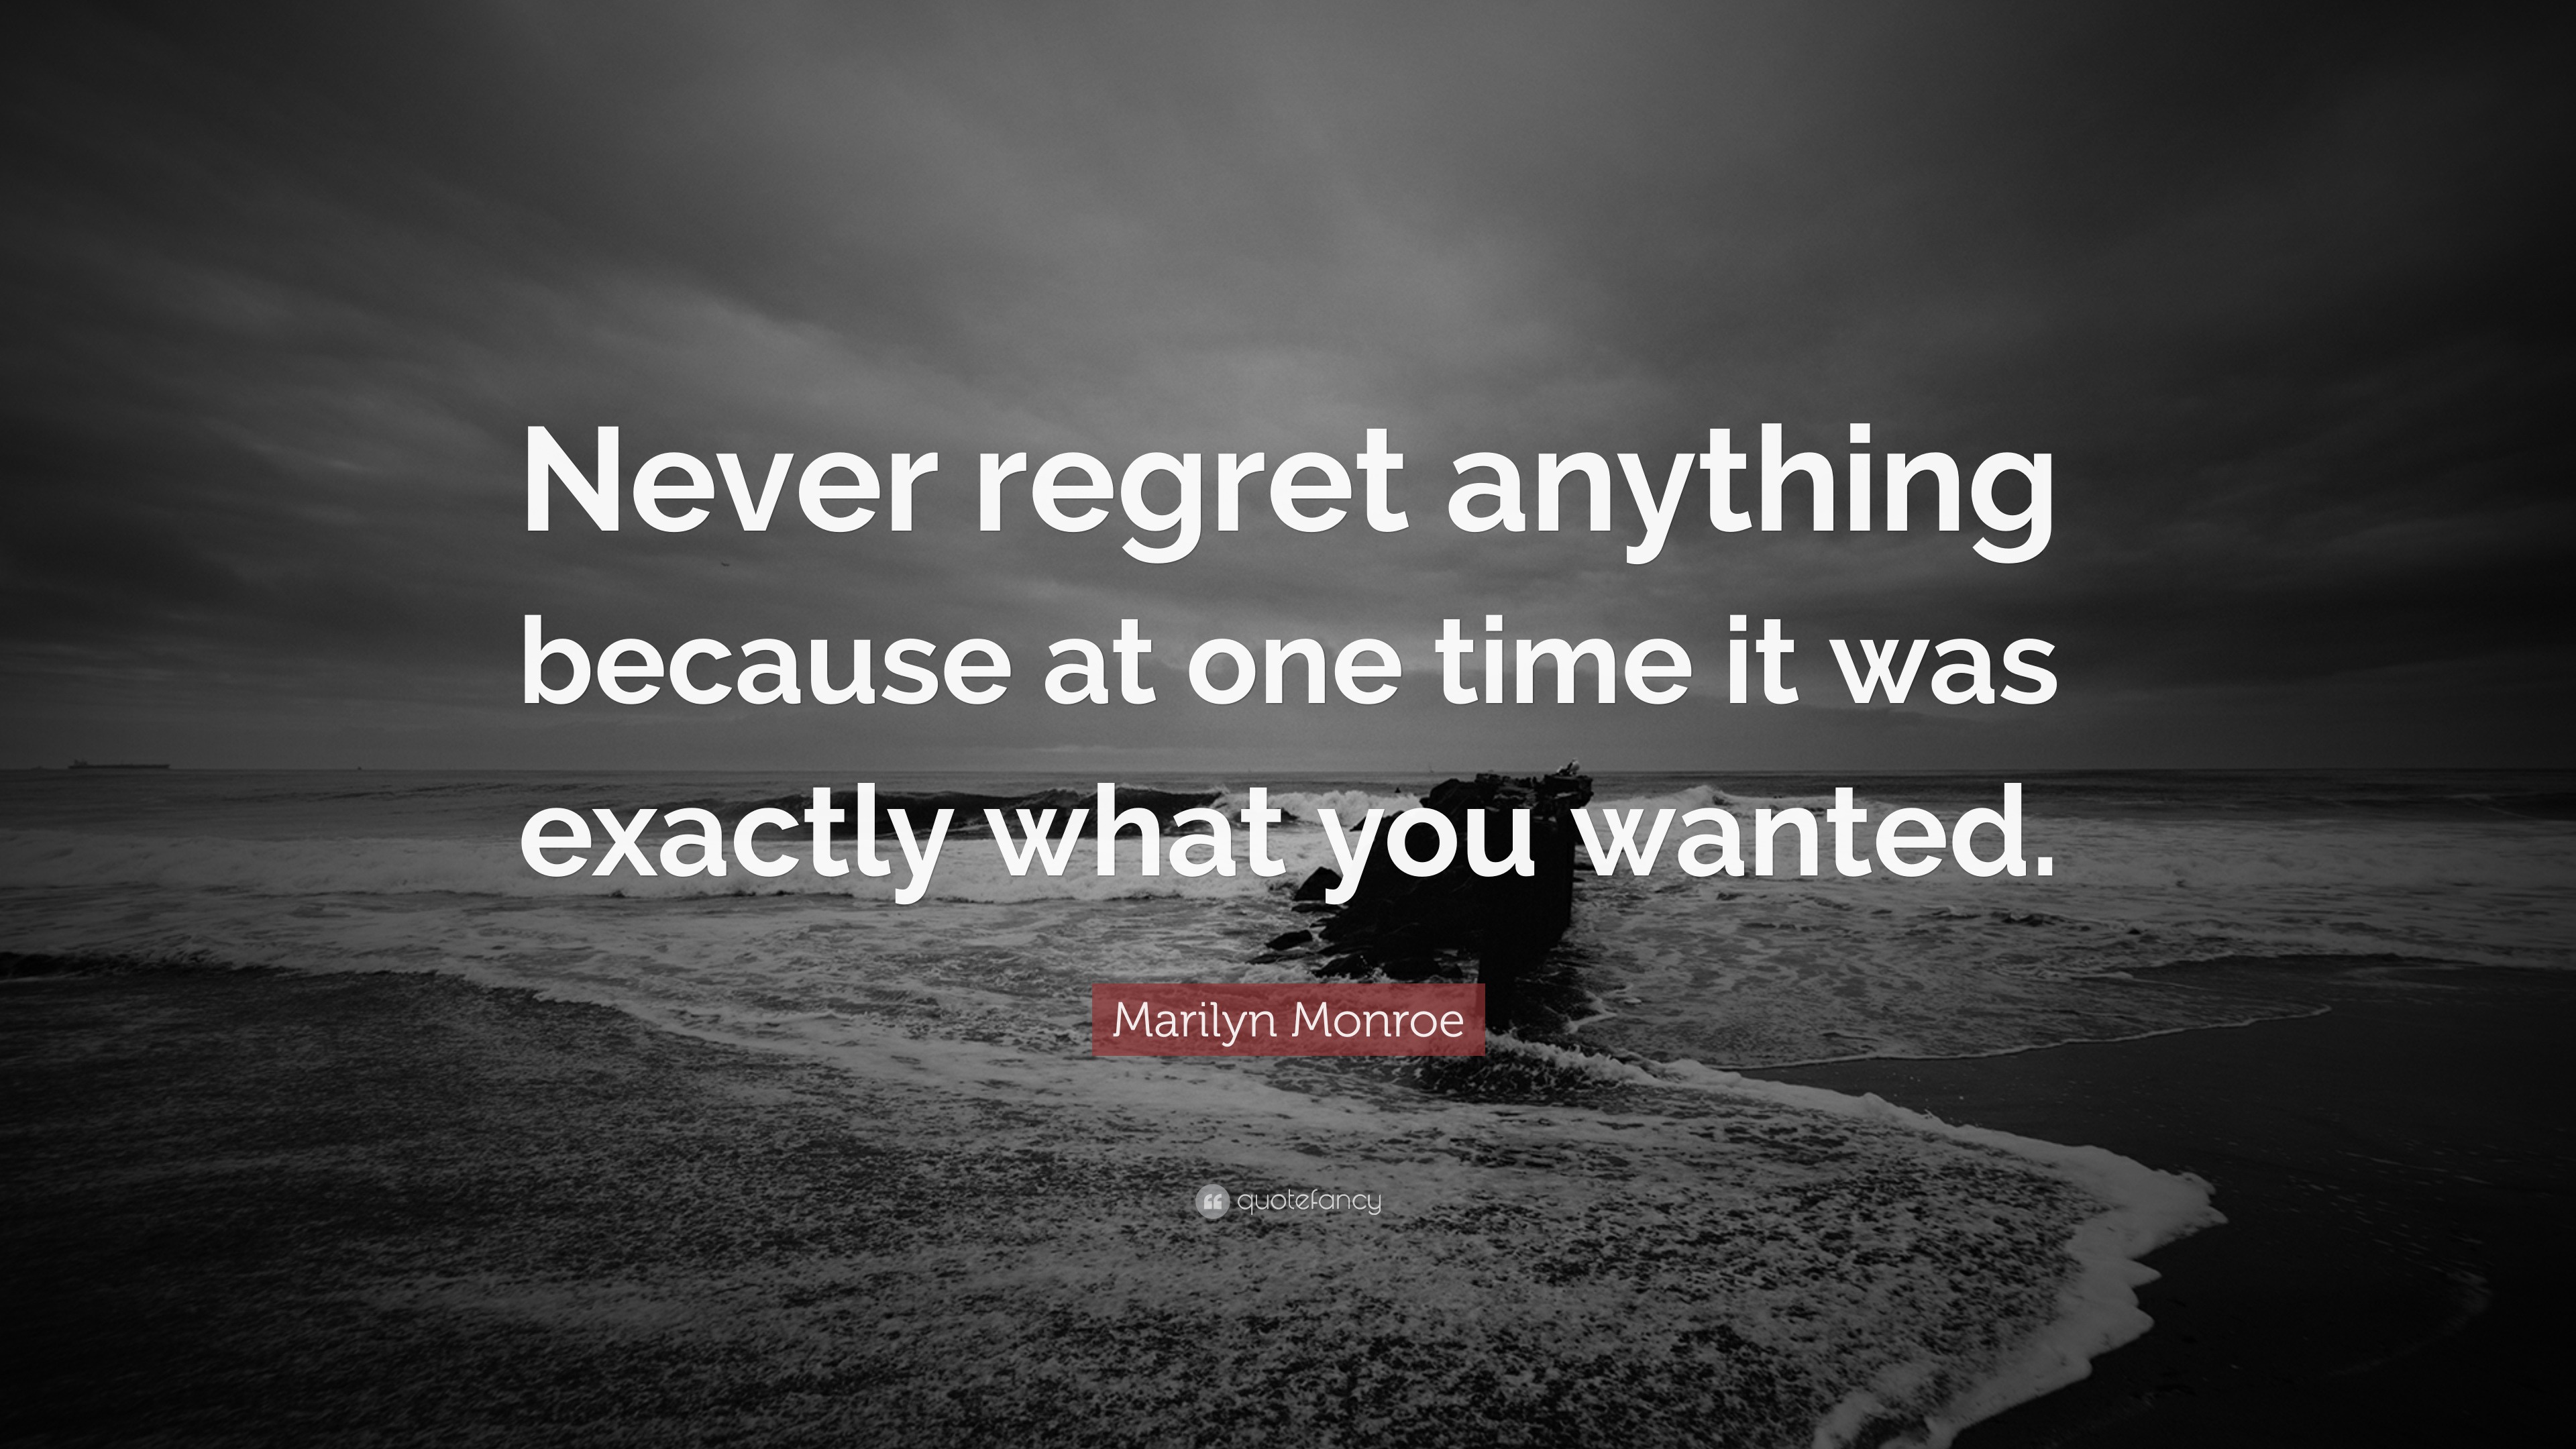 Marilyn Monroe Quote “Never regret anything because at